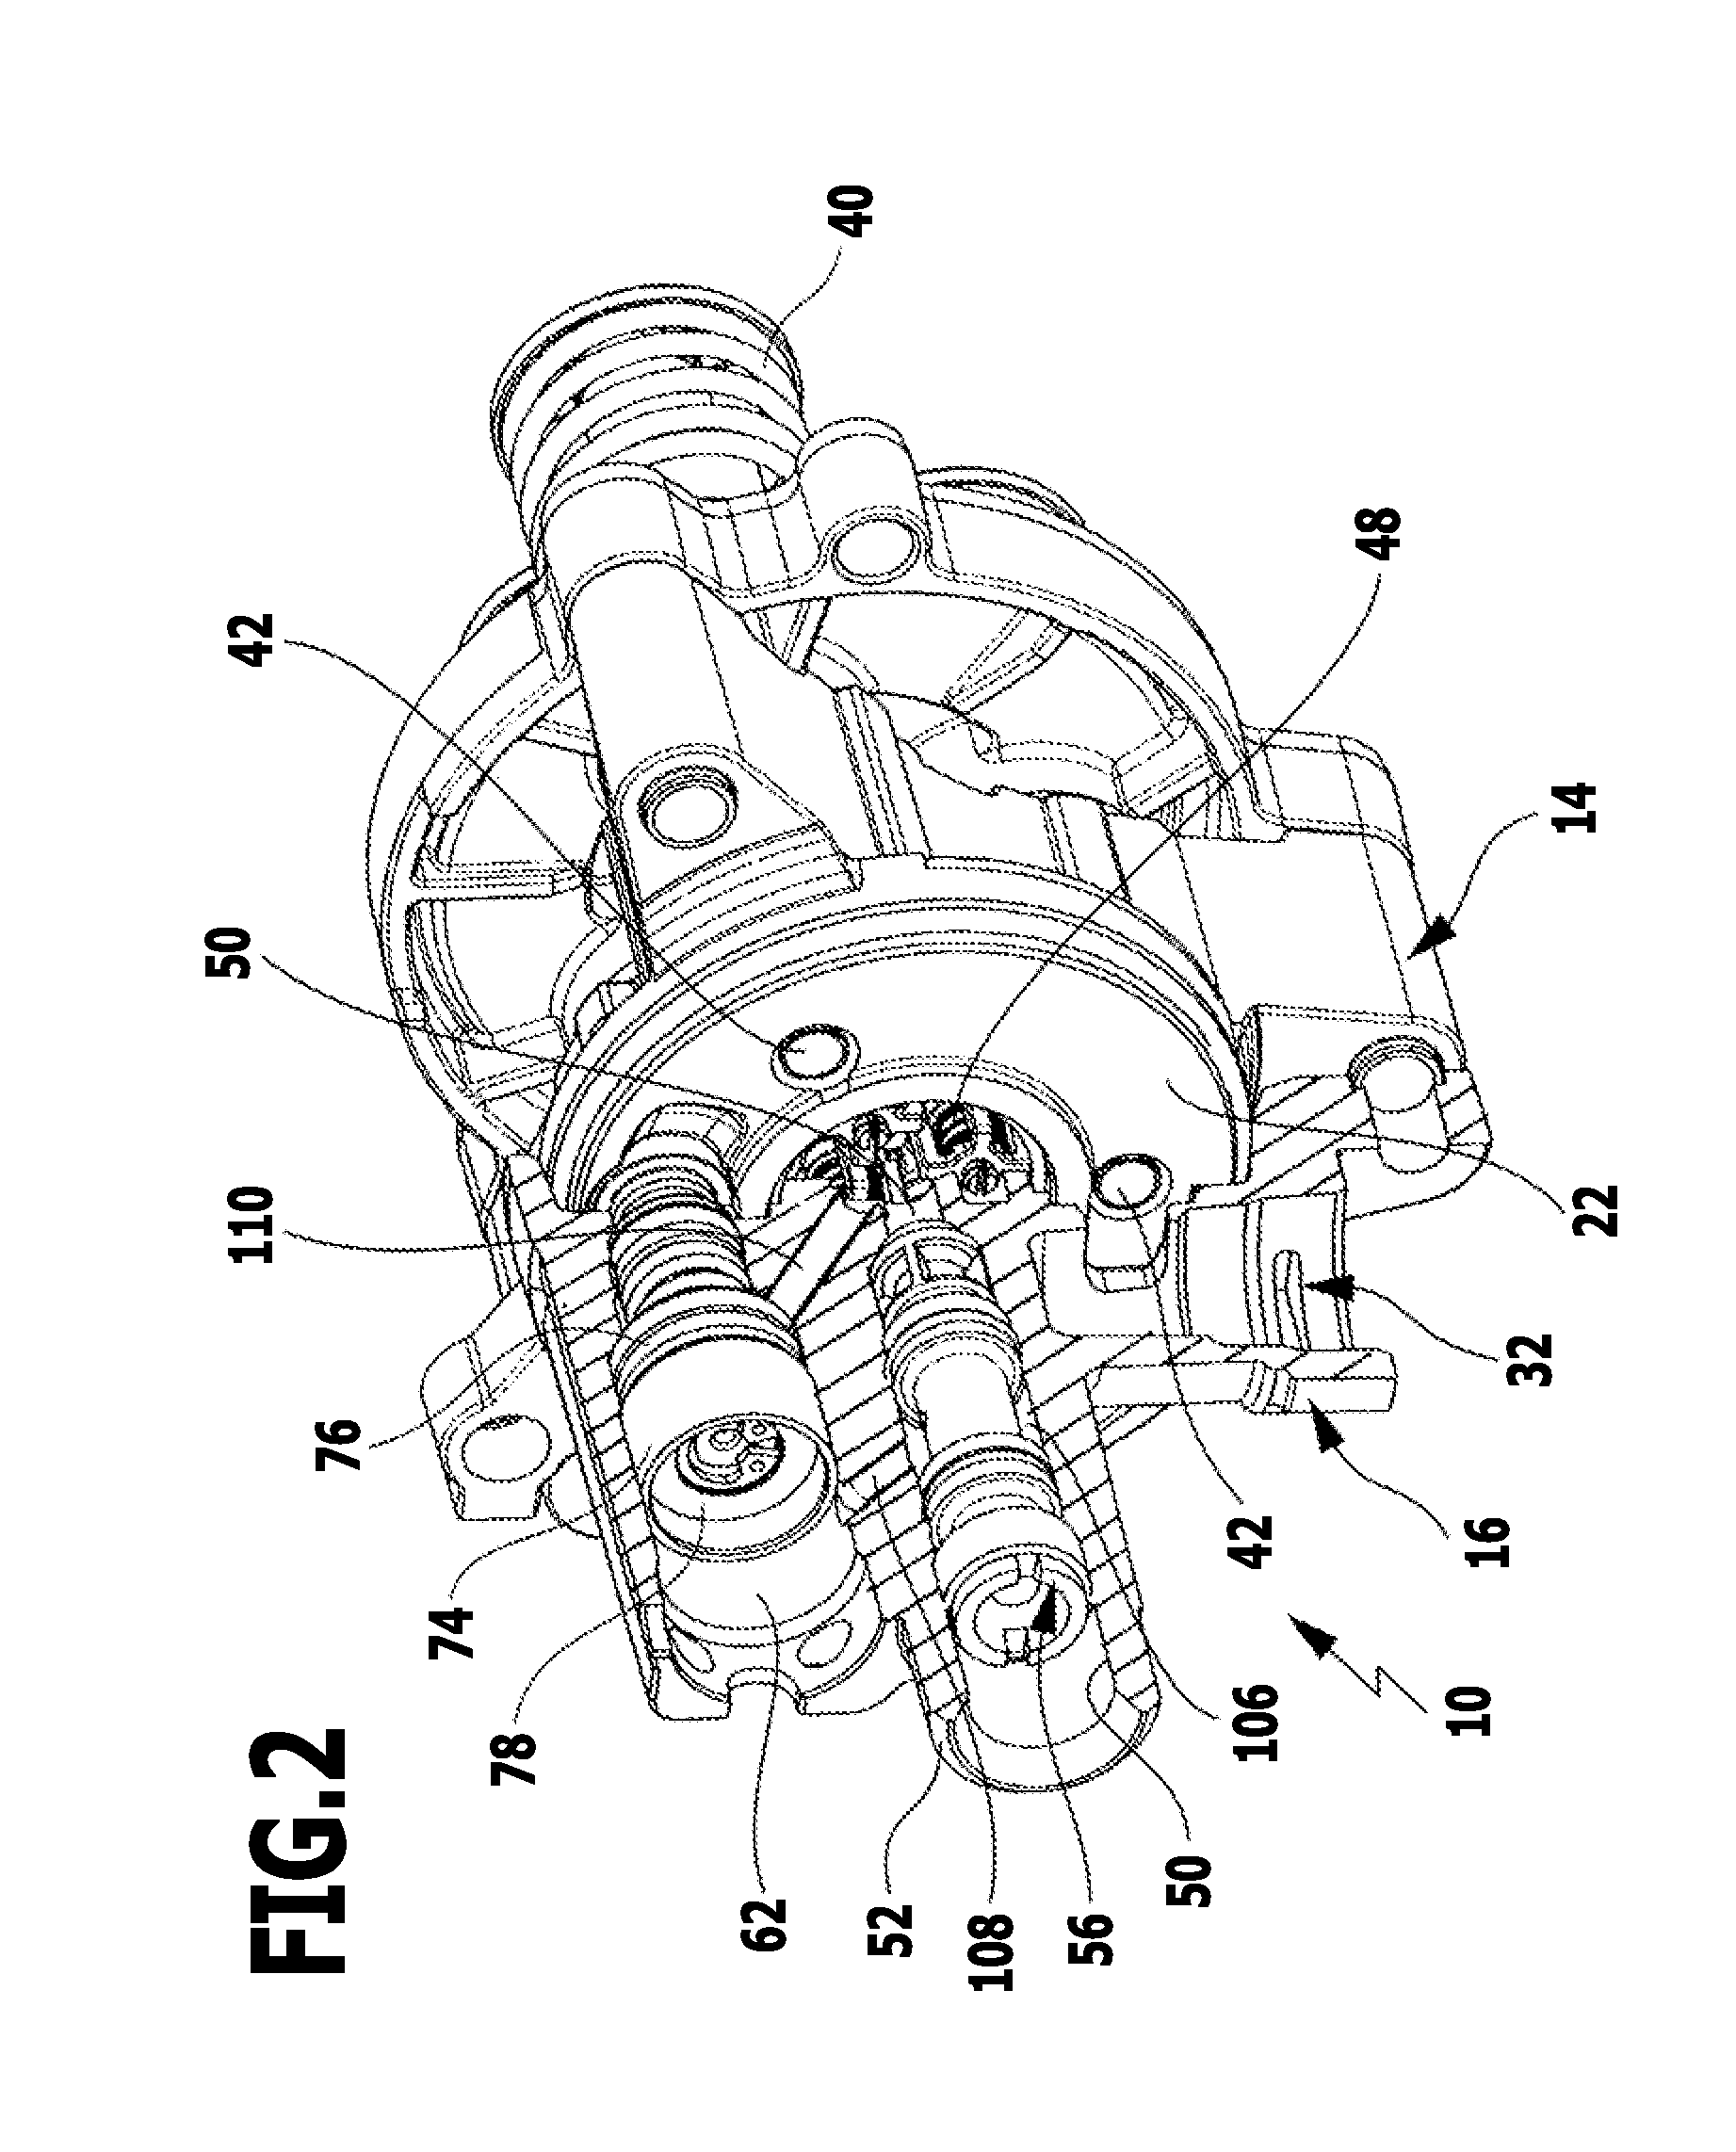 Pump for a high-pressure cleaning device